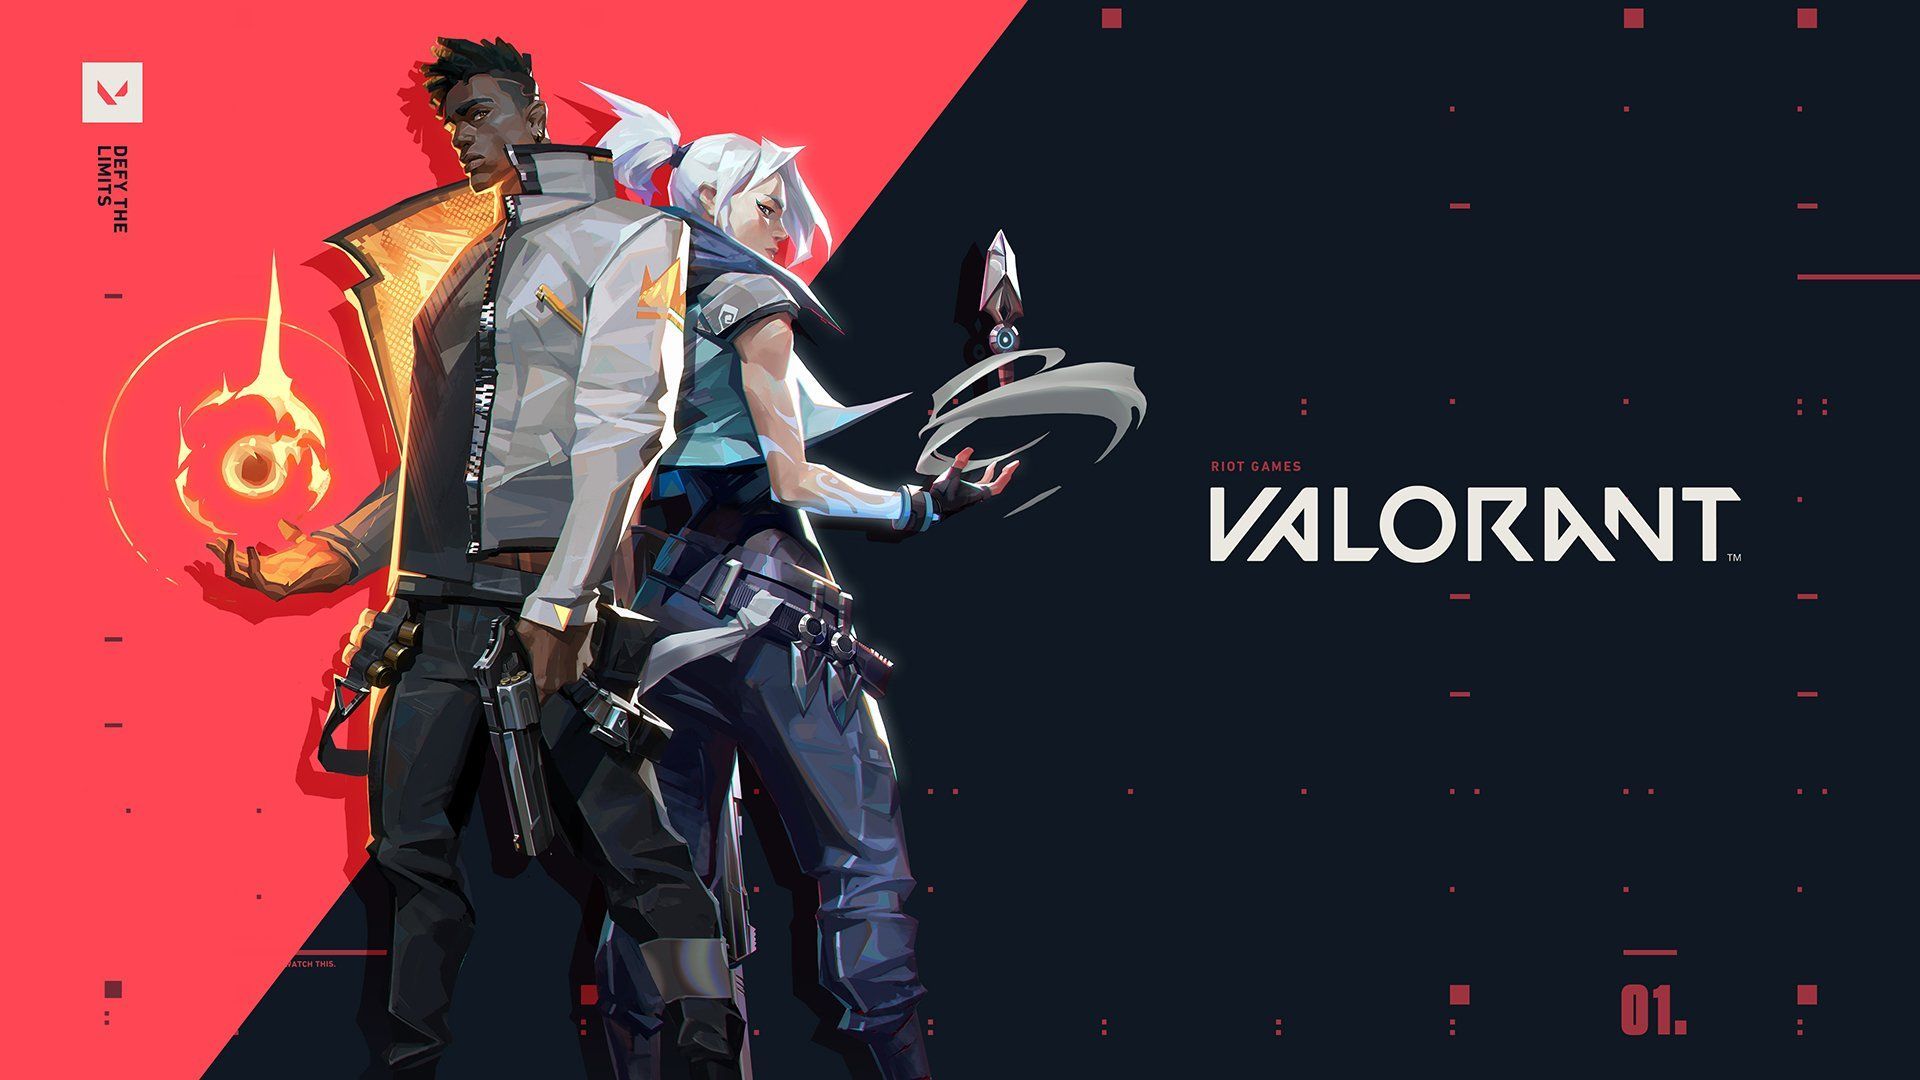 HD valorant (video game) wallpapers